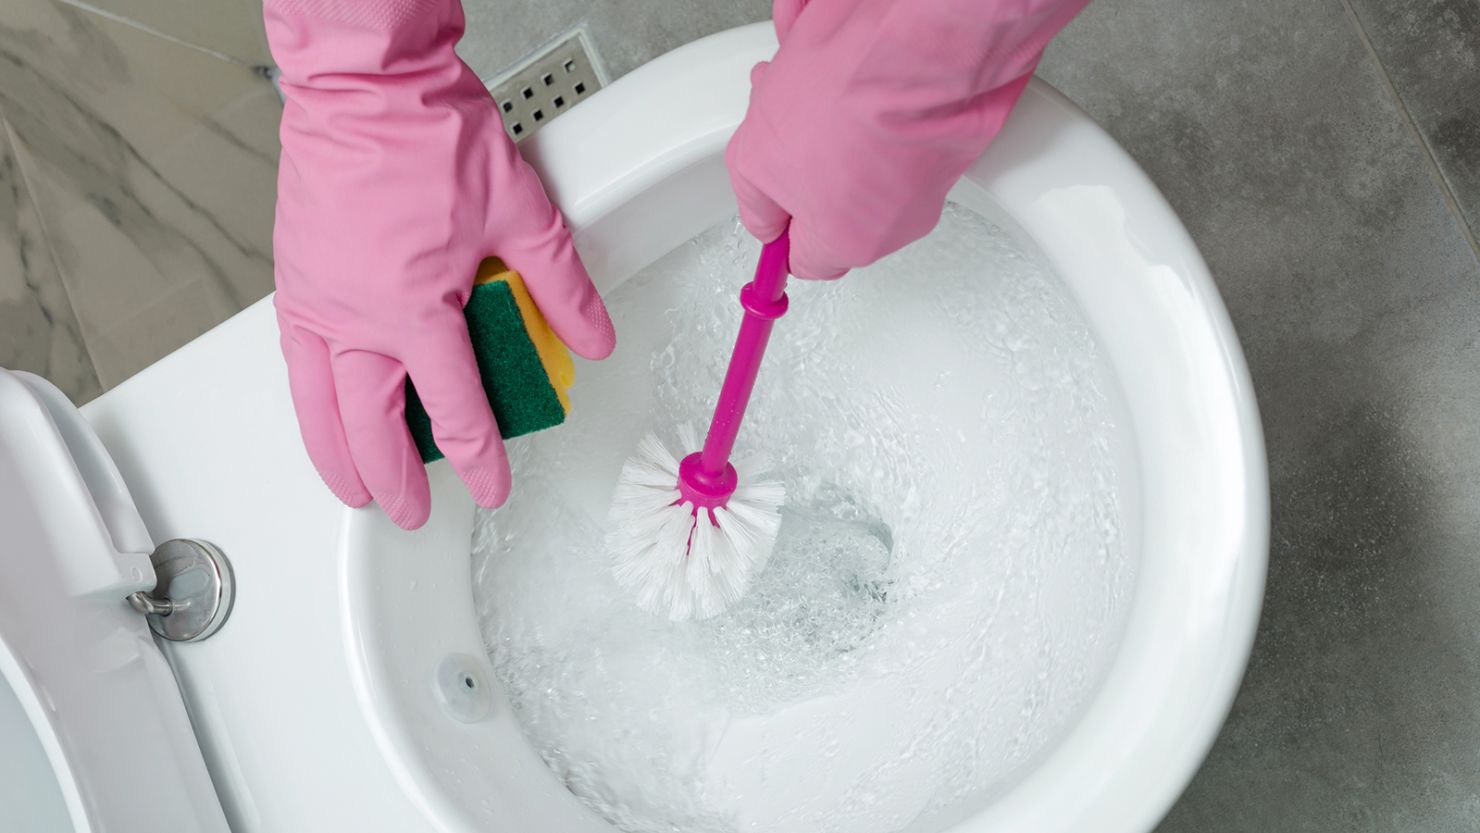 Best Cleaning Product For Your Bathroom, Worth It?